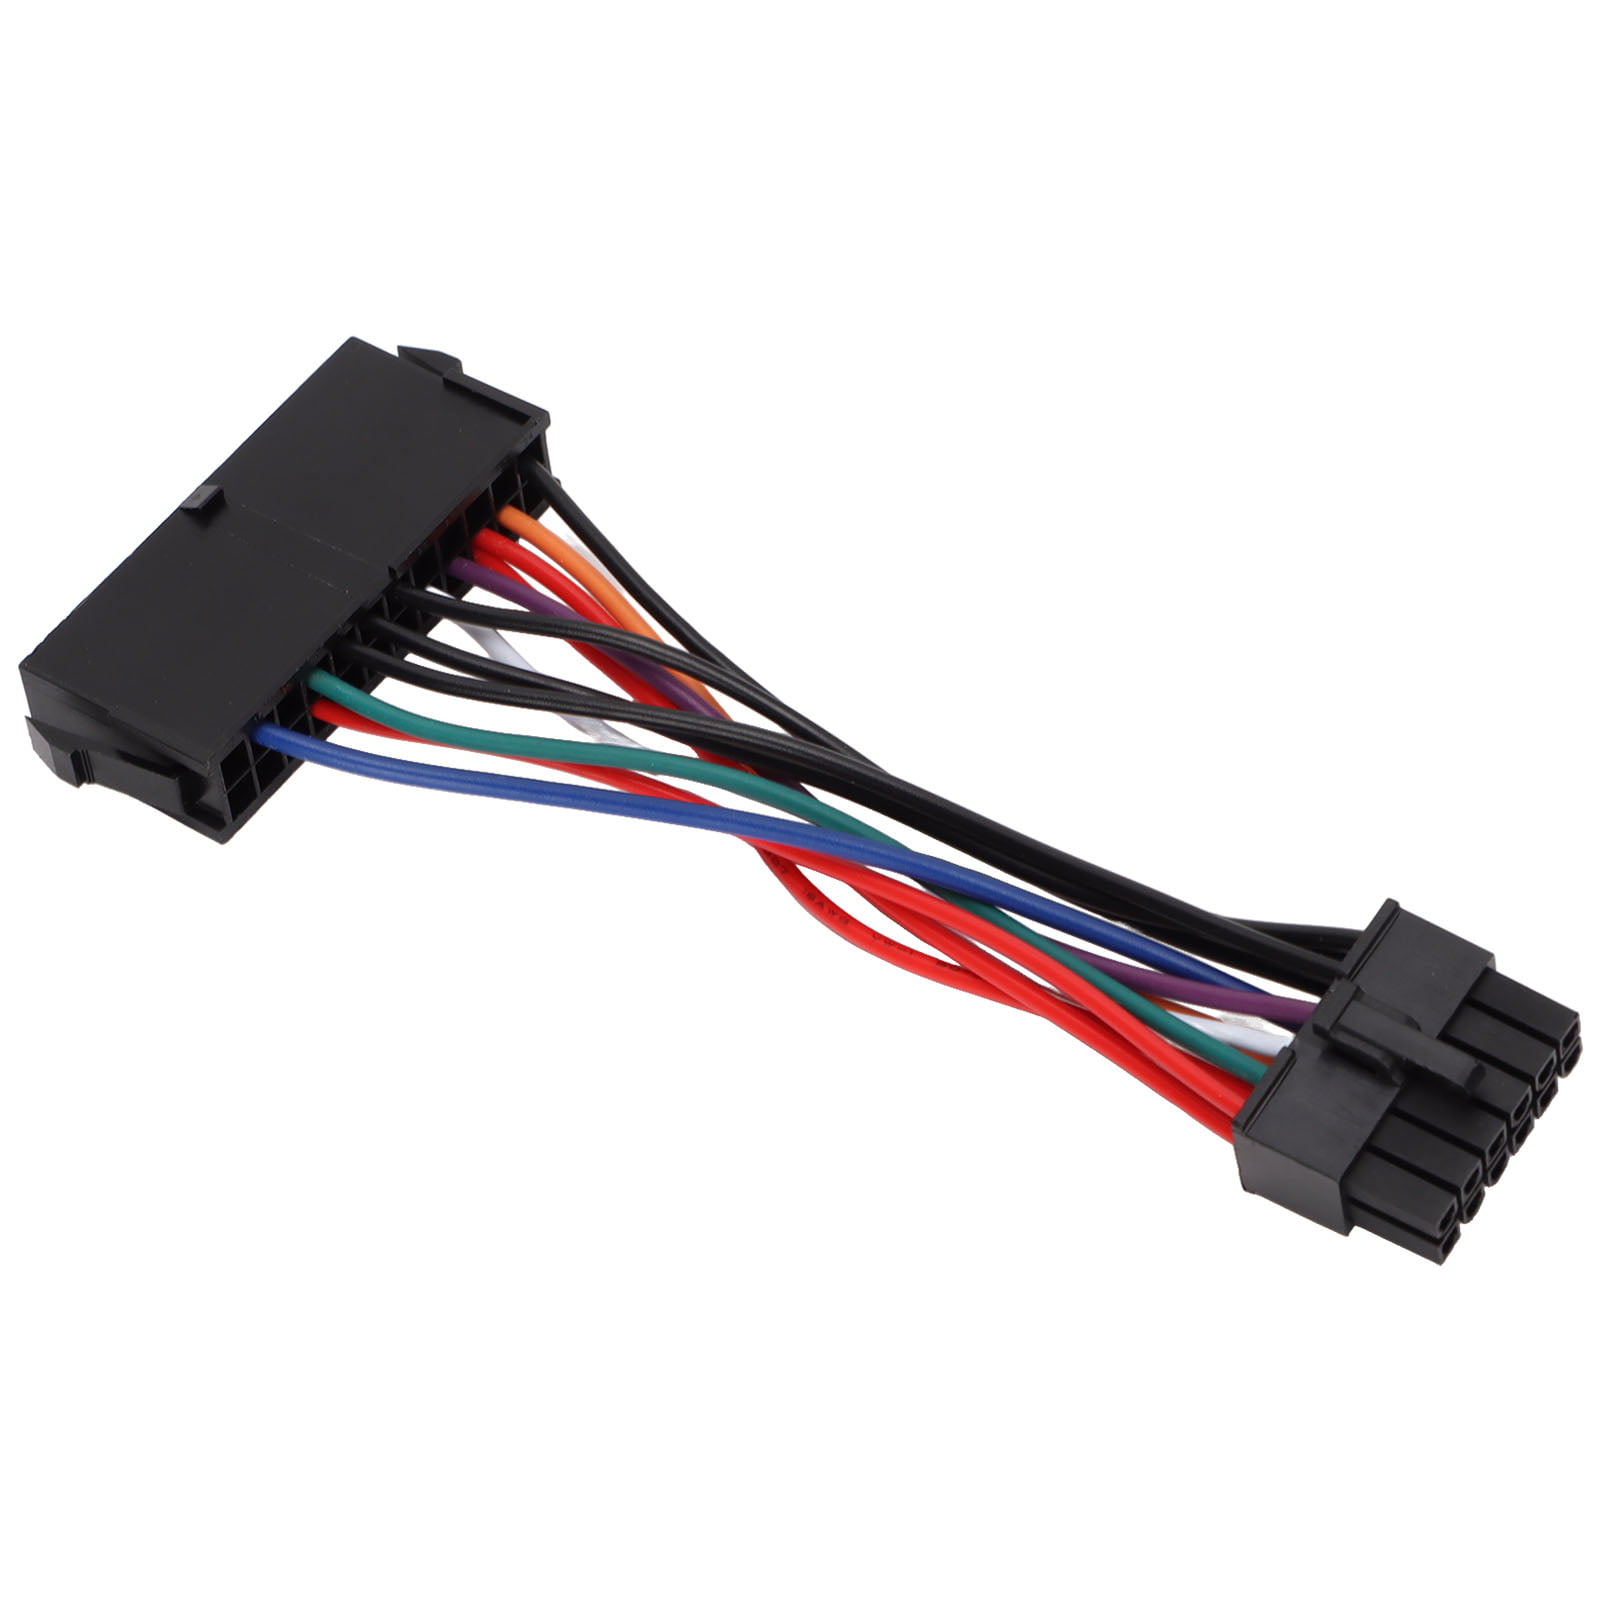 A75 B75 Q75 Q77 ZLKSKER 24-Pin to 14-Pin Cable 4-Inch Plug and Play ATX PSU Main Power Adapter Cable for Lenovo IBM Dell